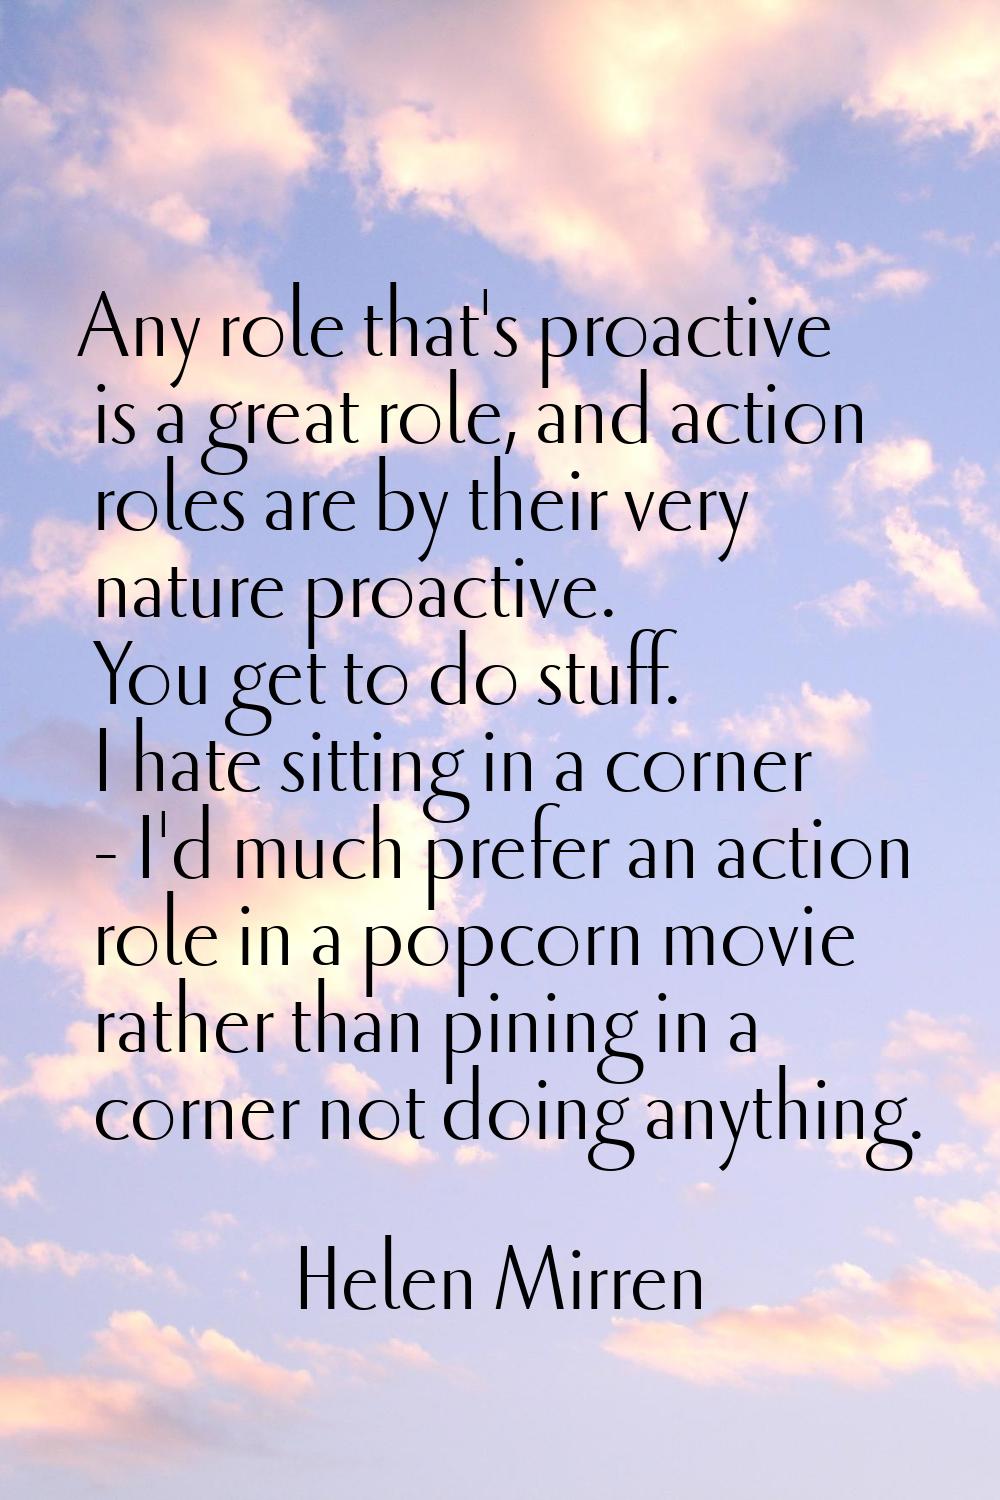 Any role that's proactive is a great role, and action roles are by their very nature proactive. You